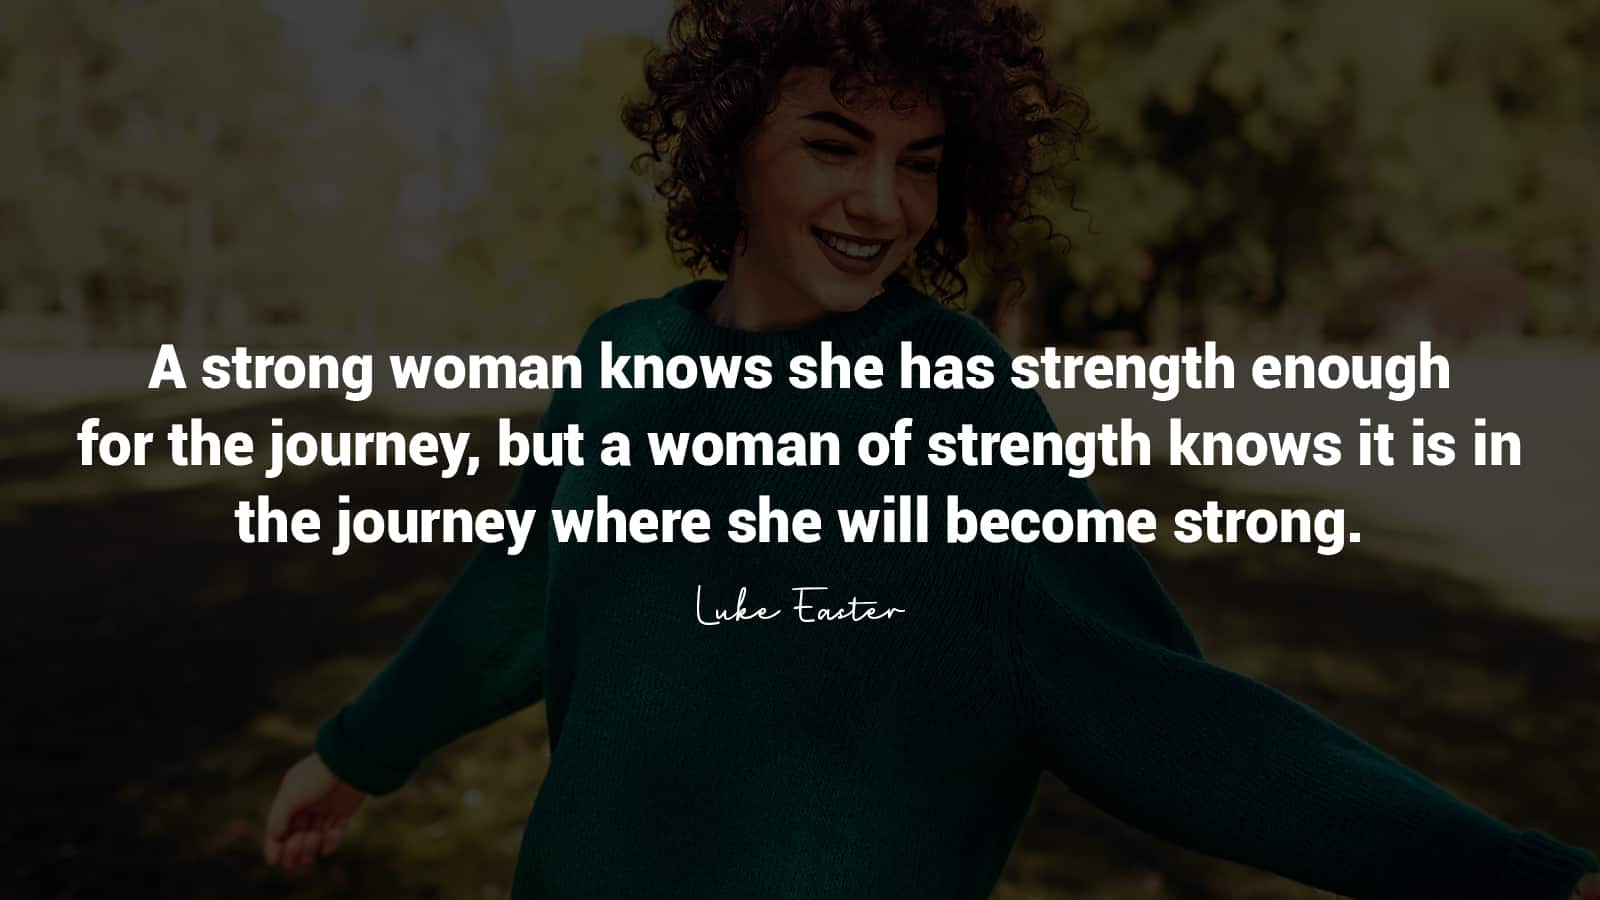 15 Strong Woman Quotes to Straighten Her Crown